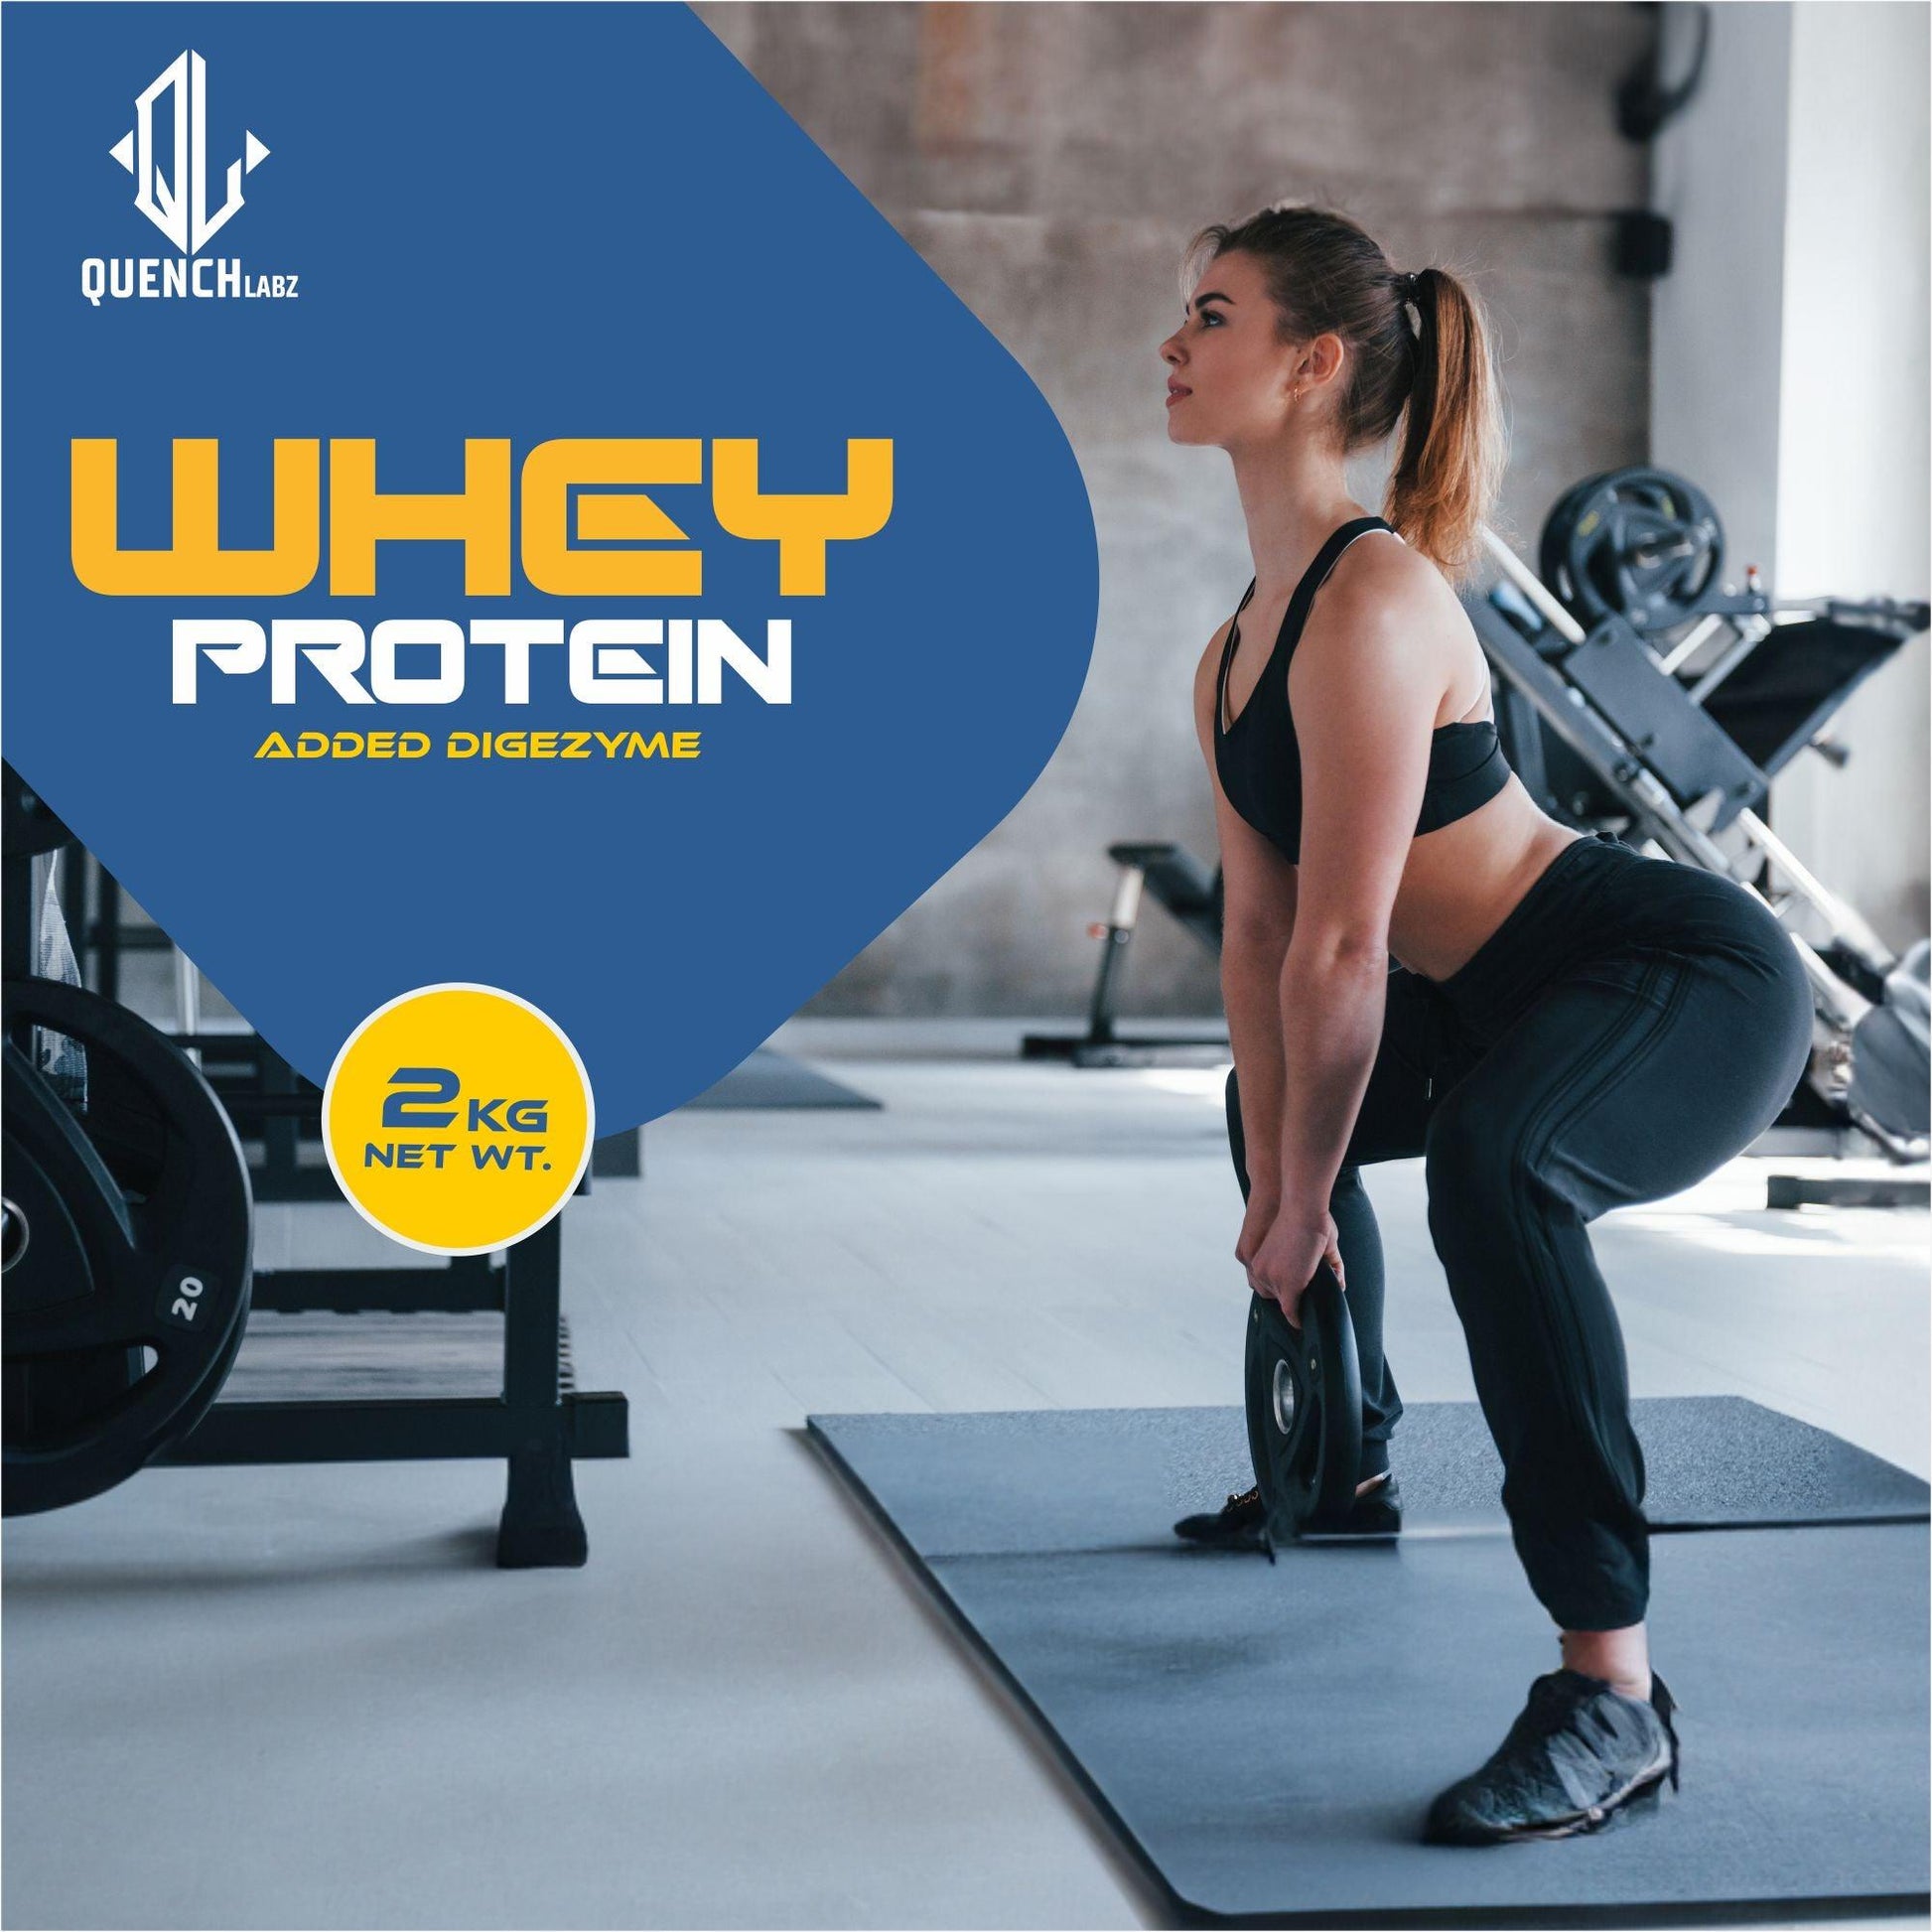 Premium Whey Protein 2 Kg + Steel Shaker Combo - Quenchlabz